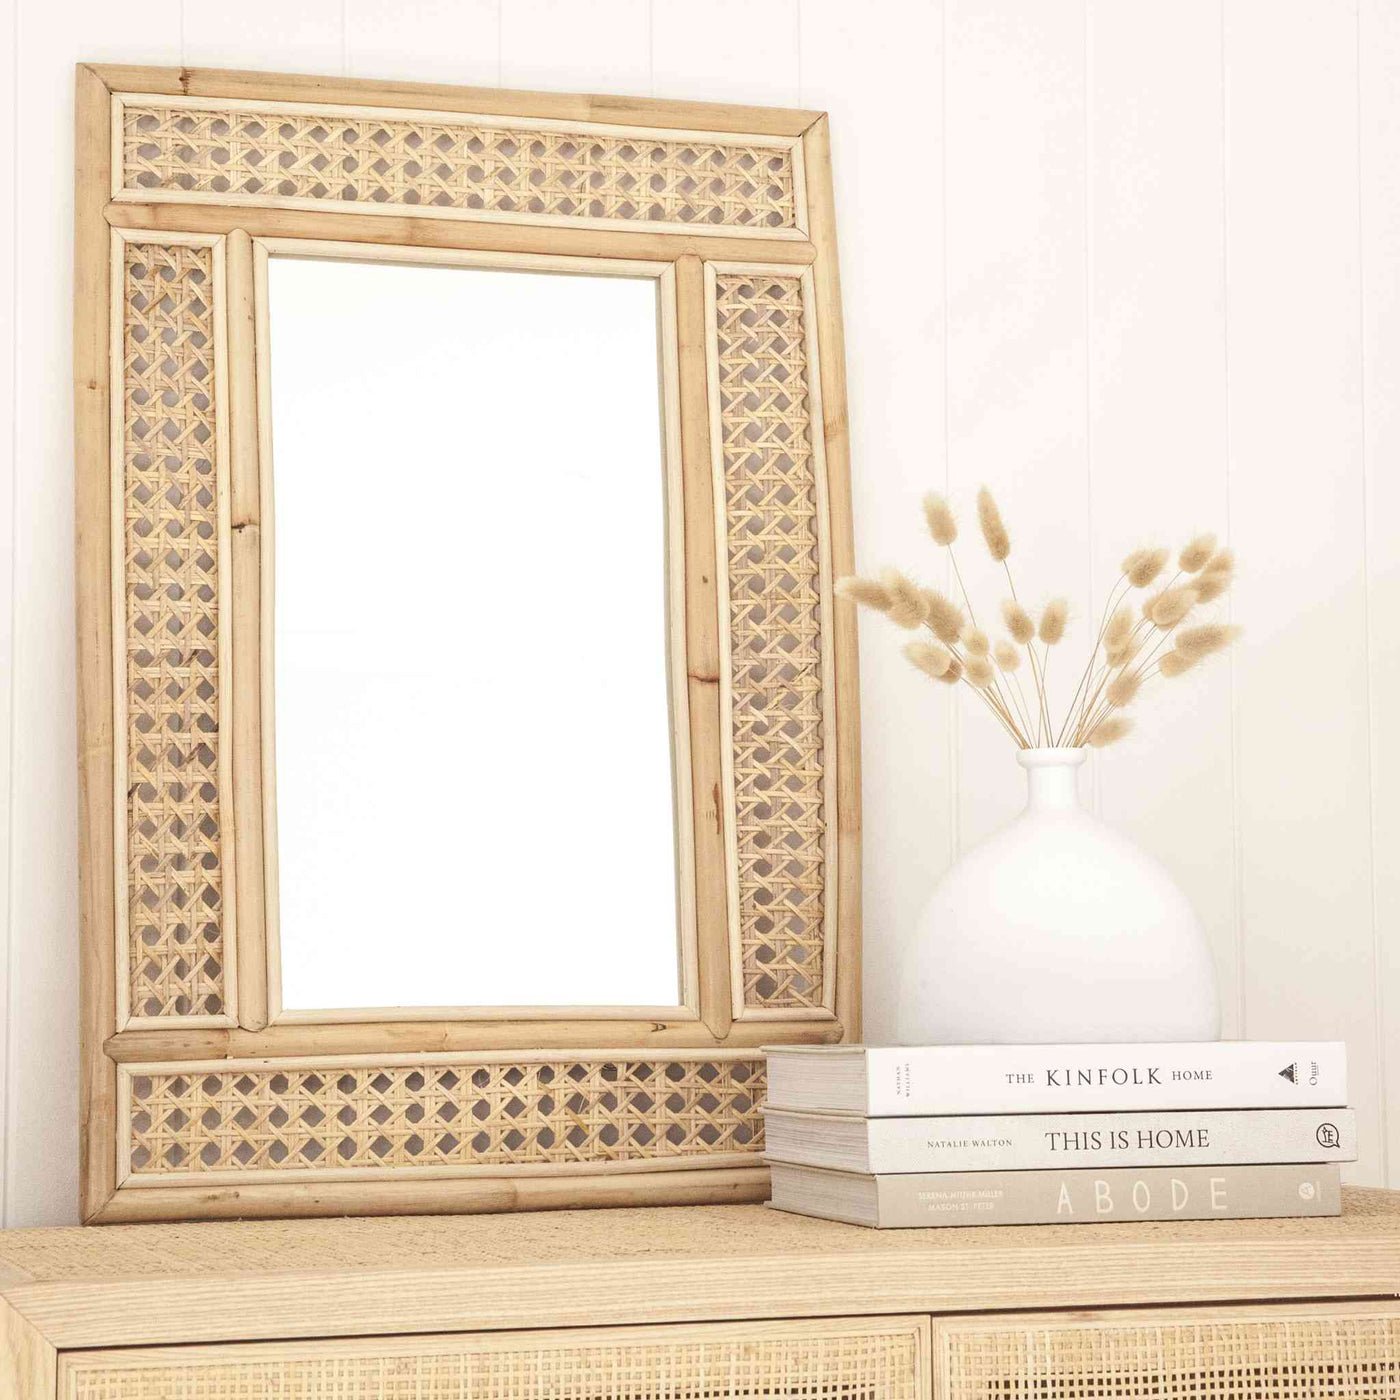 Classic style rentangular rattan mirror with woven rattan frame styled with books on a rattan cupboard..